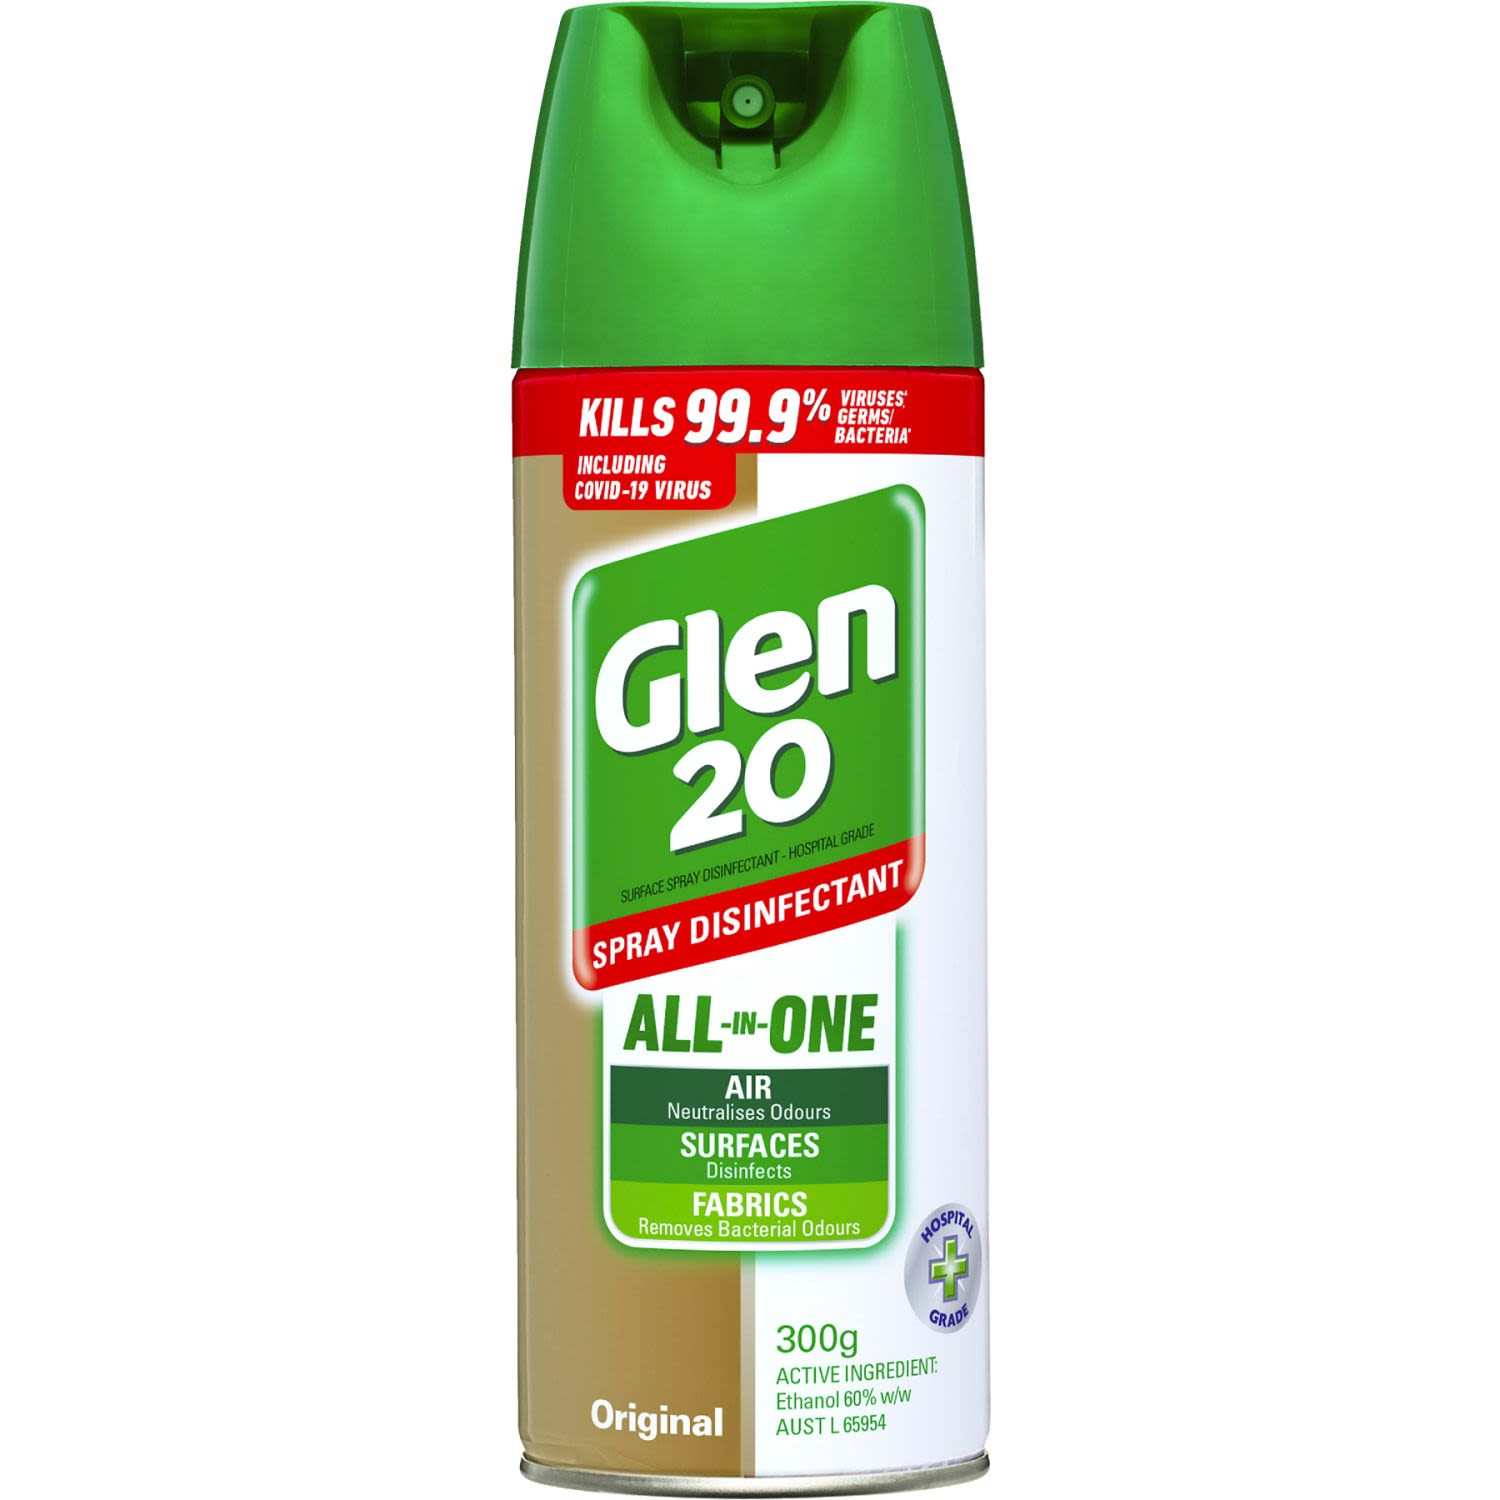 - Air - Neutralises Odours
- Surfaces - Disinfects
- Fabrics - Removes bacteria odours. 

Glen 20 Spray Disinfectant can help protect your family by working to prevent the spread of germs. 

Glen 20 is fast, easy to use and effective at:

- Killing 99.9% of germs/bacteria* & Viruses^ on hard and soft surfaces.
-  Killing the source of mould allergens and controlling the growth of mould and mildew on hard surfaces.
- Killing athlete's foot fungus on soft surfaces.

- Eliminating Odour Causing Bacteria to leave your home smelling fresh and clean. Glen 20 "gets to the source" of the odour without heavy perfume and eliminates damp musty odours in areas where air does not circulate. Ordinary non-germicidal sprays can't do this.

Glen 20 Spray disinfectant kills the following germs & viruses:

Germs/Bacteria:
- E. coli
- Salmonella Choleraesuis.
- Staphylococcus aureus.
- Pseudomonas aeruginosa. 
- Streptococcus pyogenes.

Viruses:
- Rhenovirus Type 37 (a leading cause of common cold).
- Influenza Type A (H1N1).
- Poliovirus (on hard surfaces only).
- Rotavirus SA11.
- Adenovirus (on hard surfaces only).
- Avian Flu Virus.
- Herpes Simplex Virus Type 1 & 2.<br /> <br />